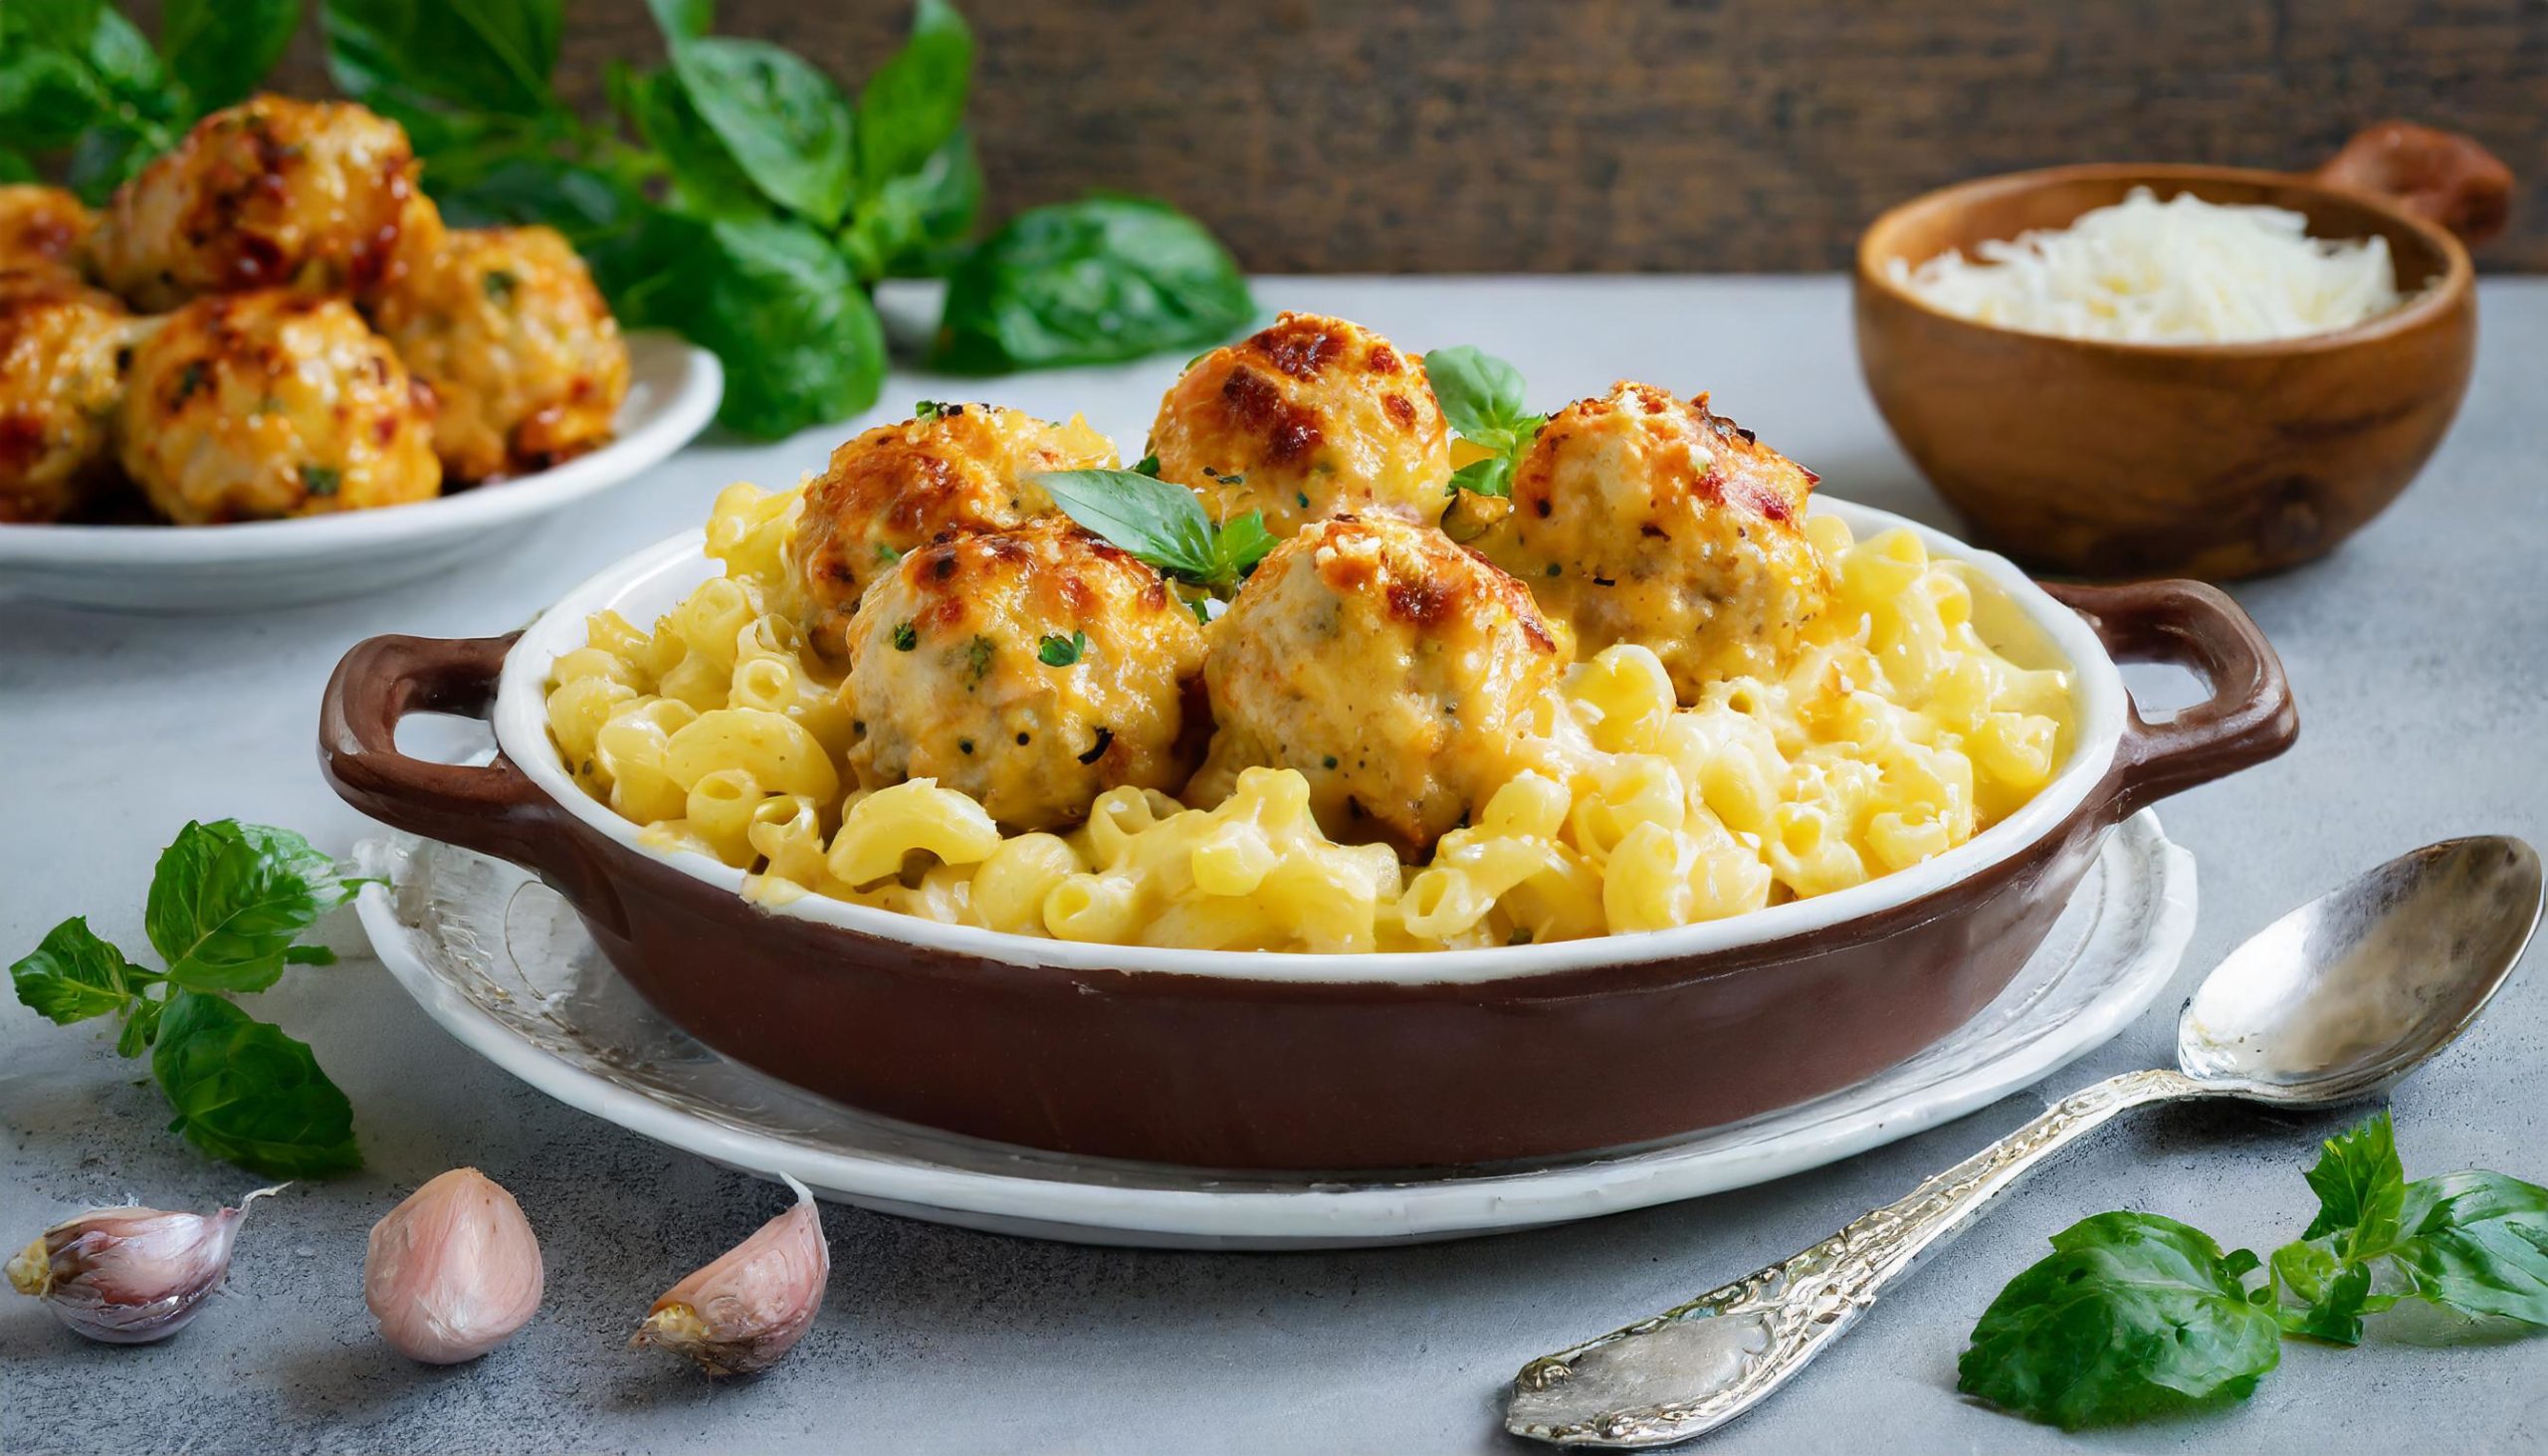 Baked mac & cheese with chicken meatballs